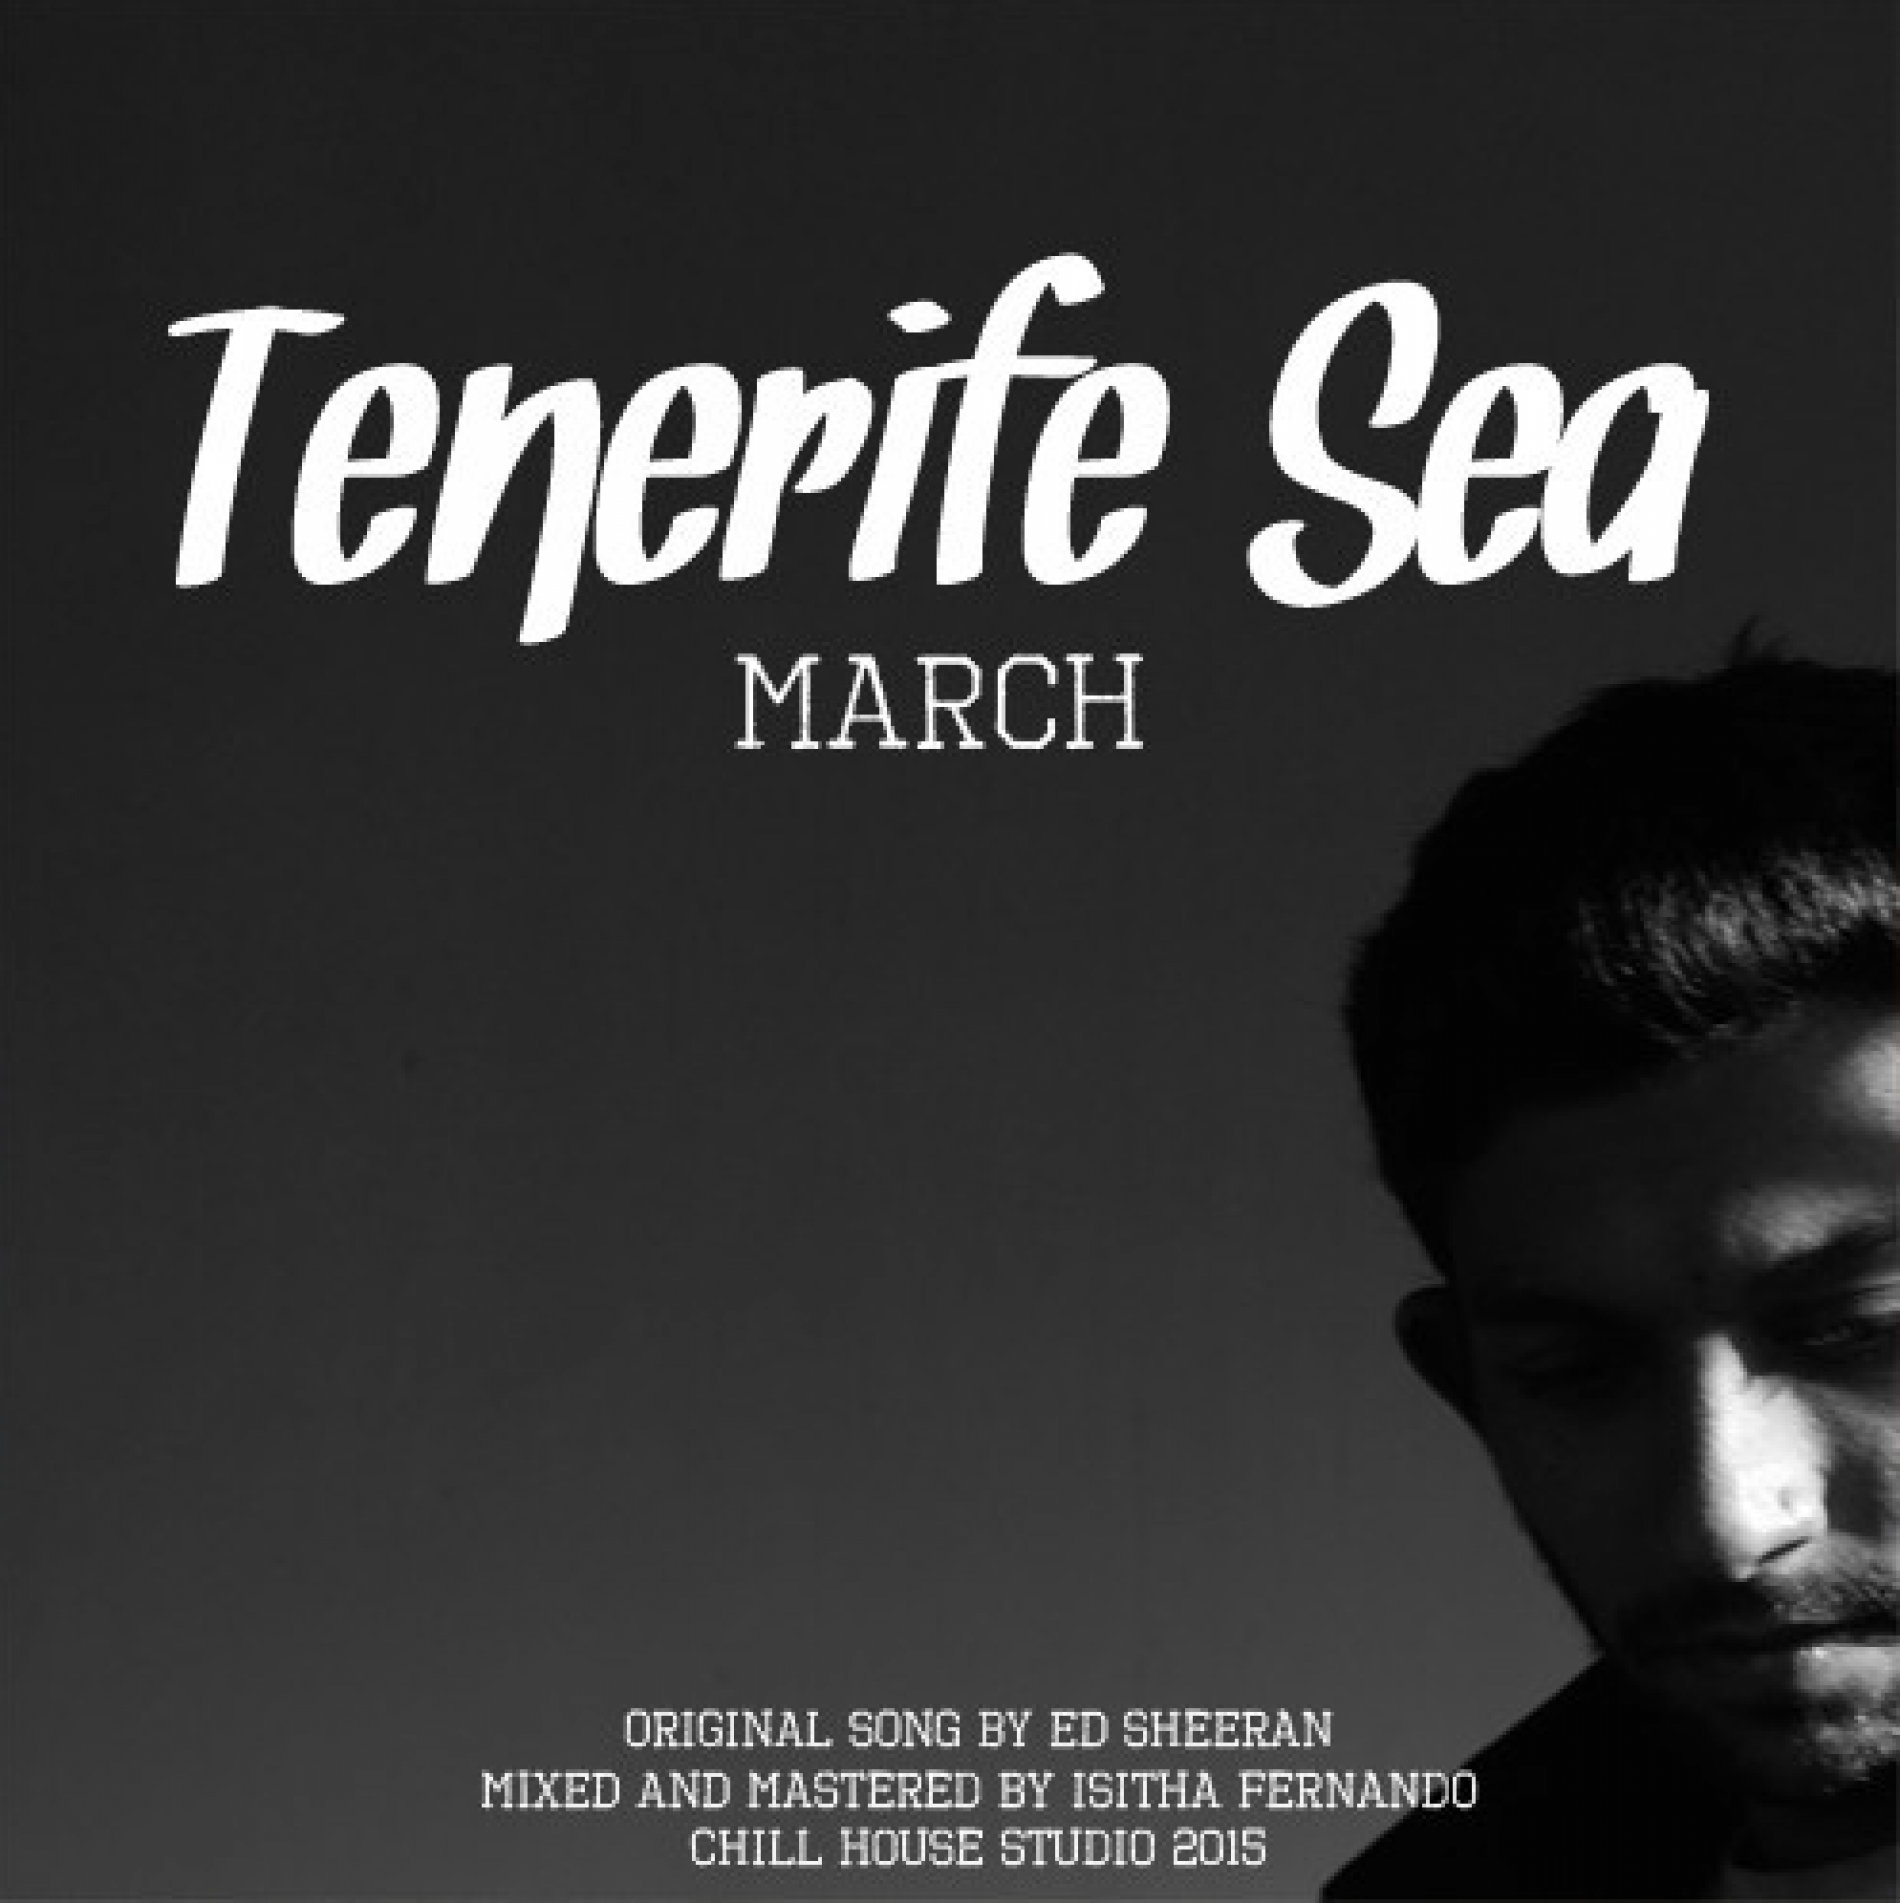 March: Tenerife Sea (Acoustic Cover)